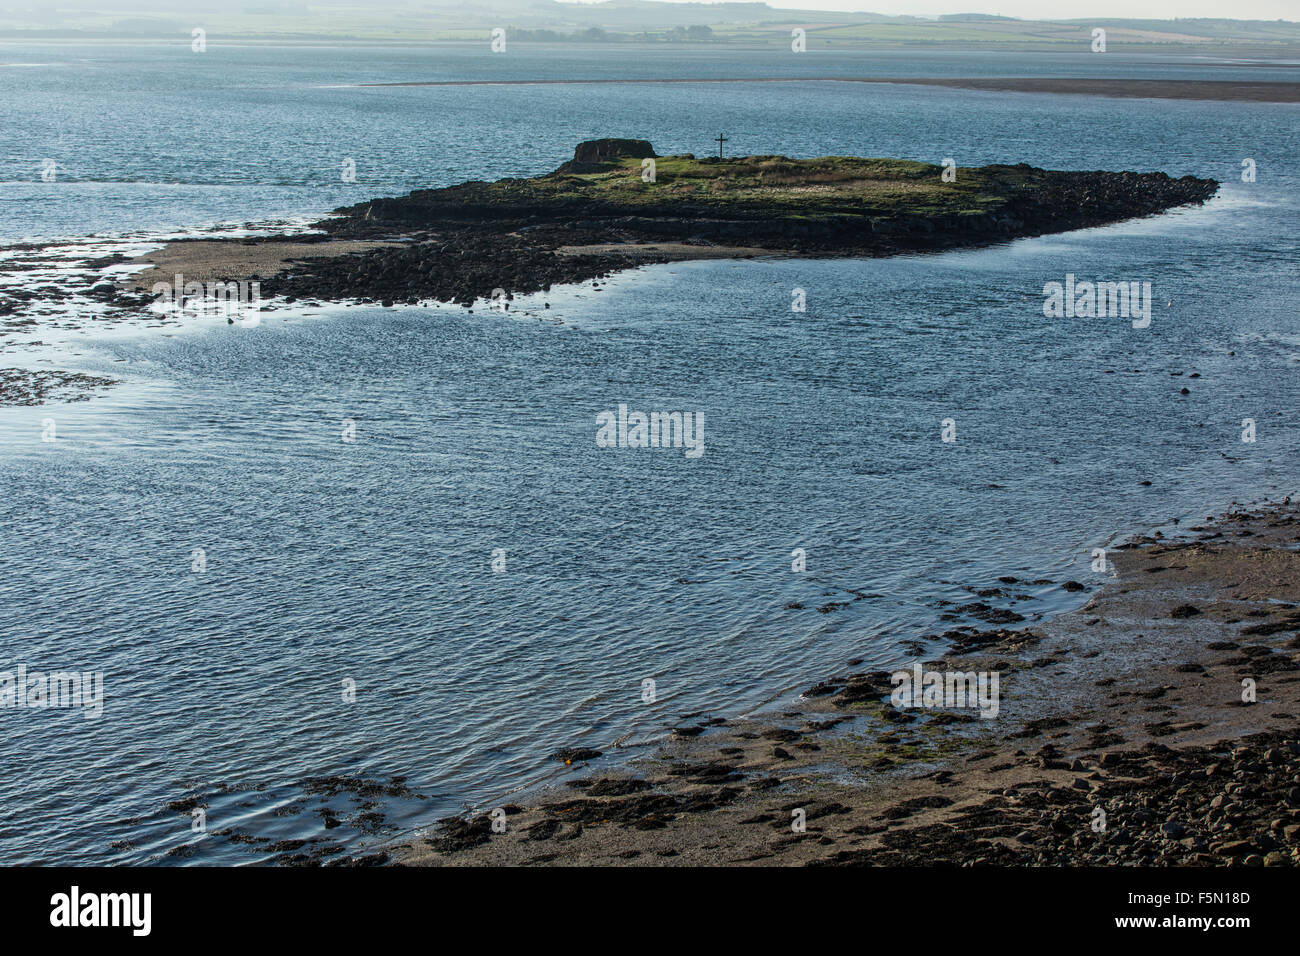 Saint Cuthbert island part of the Holy Island in Northumberland. View from the main island at high tide. Stock Photo